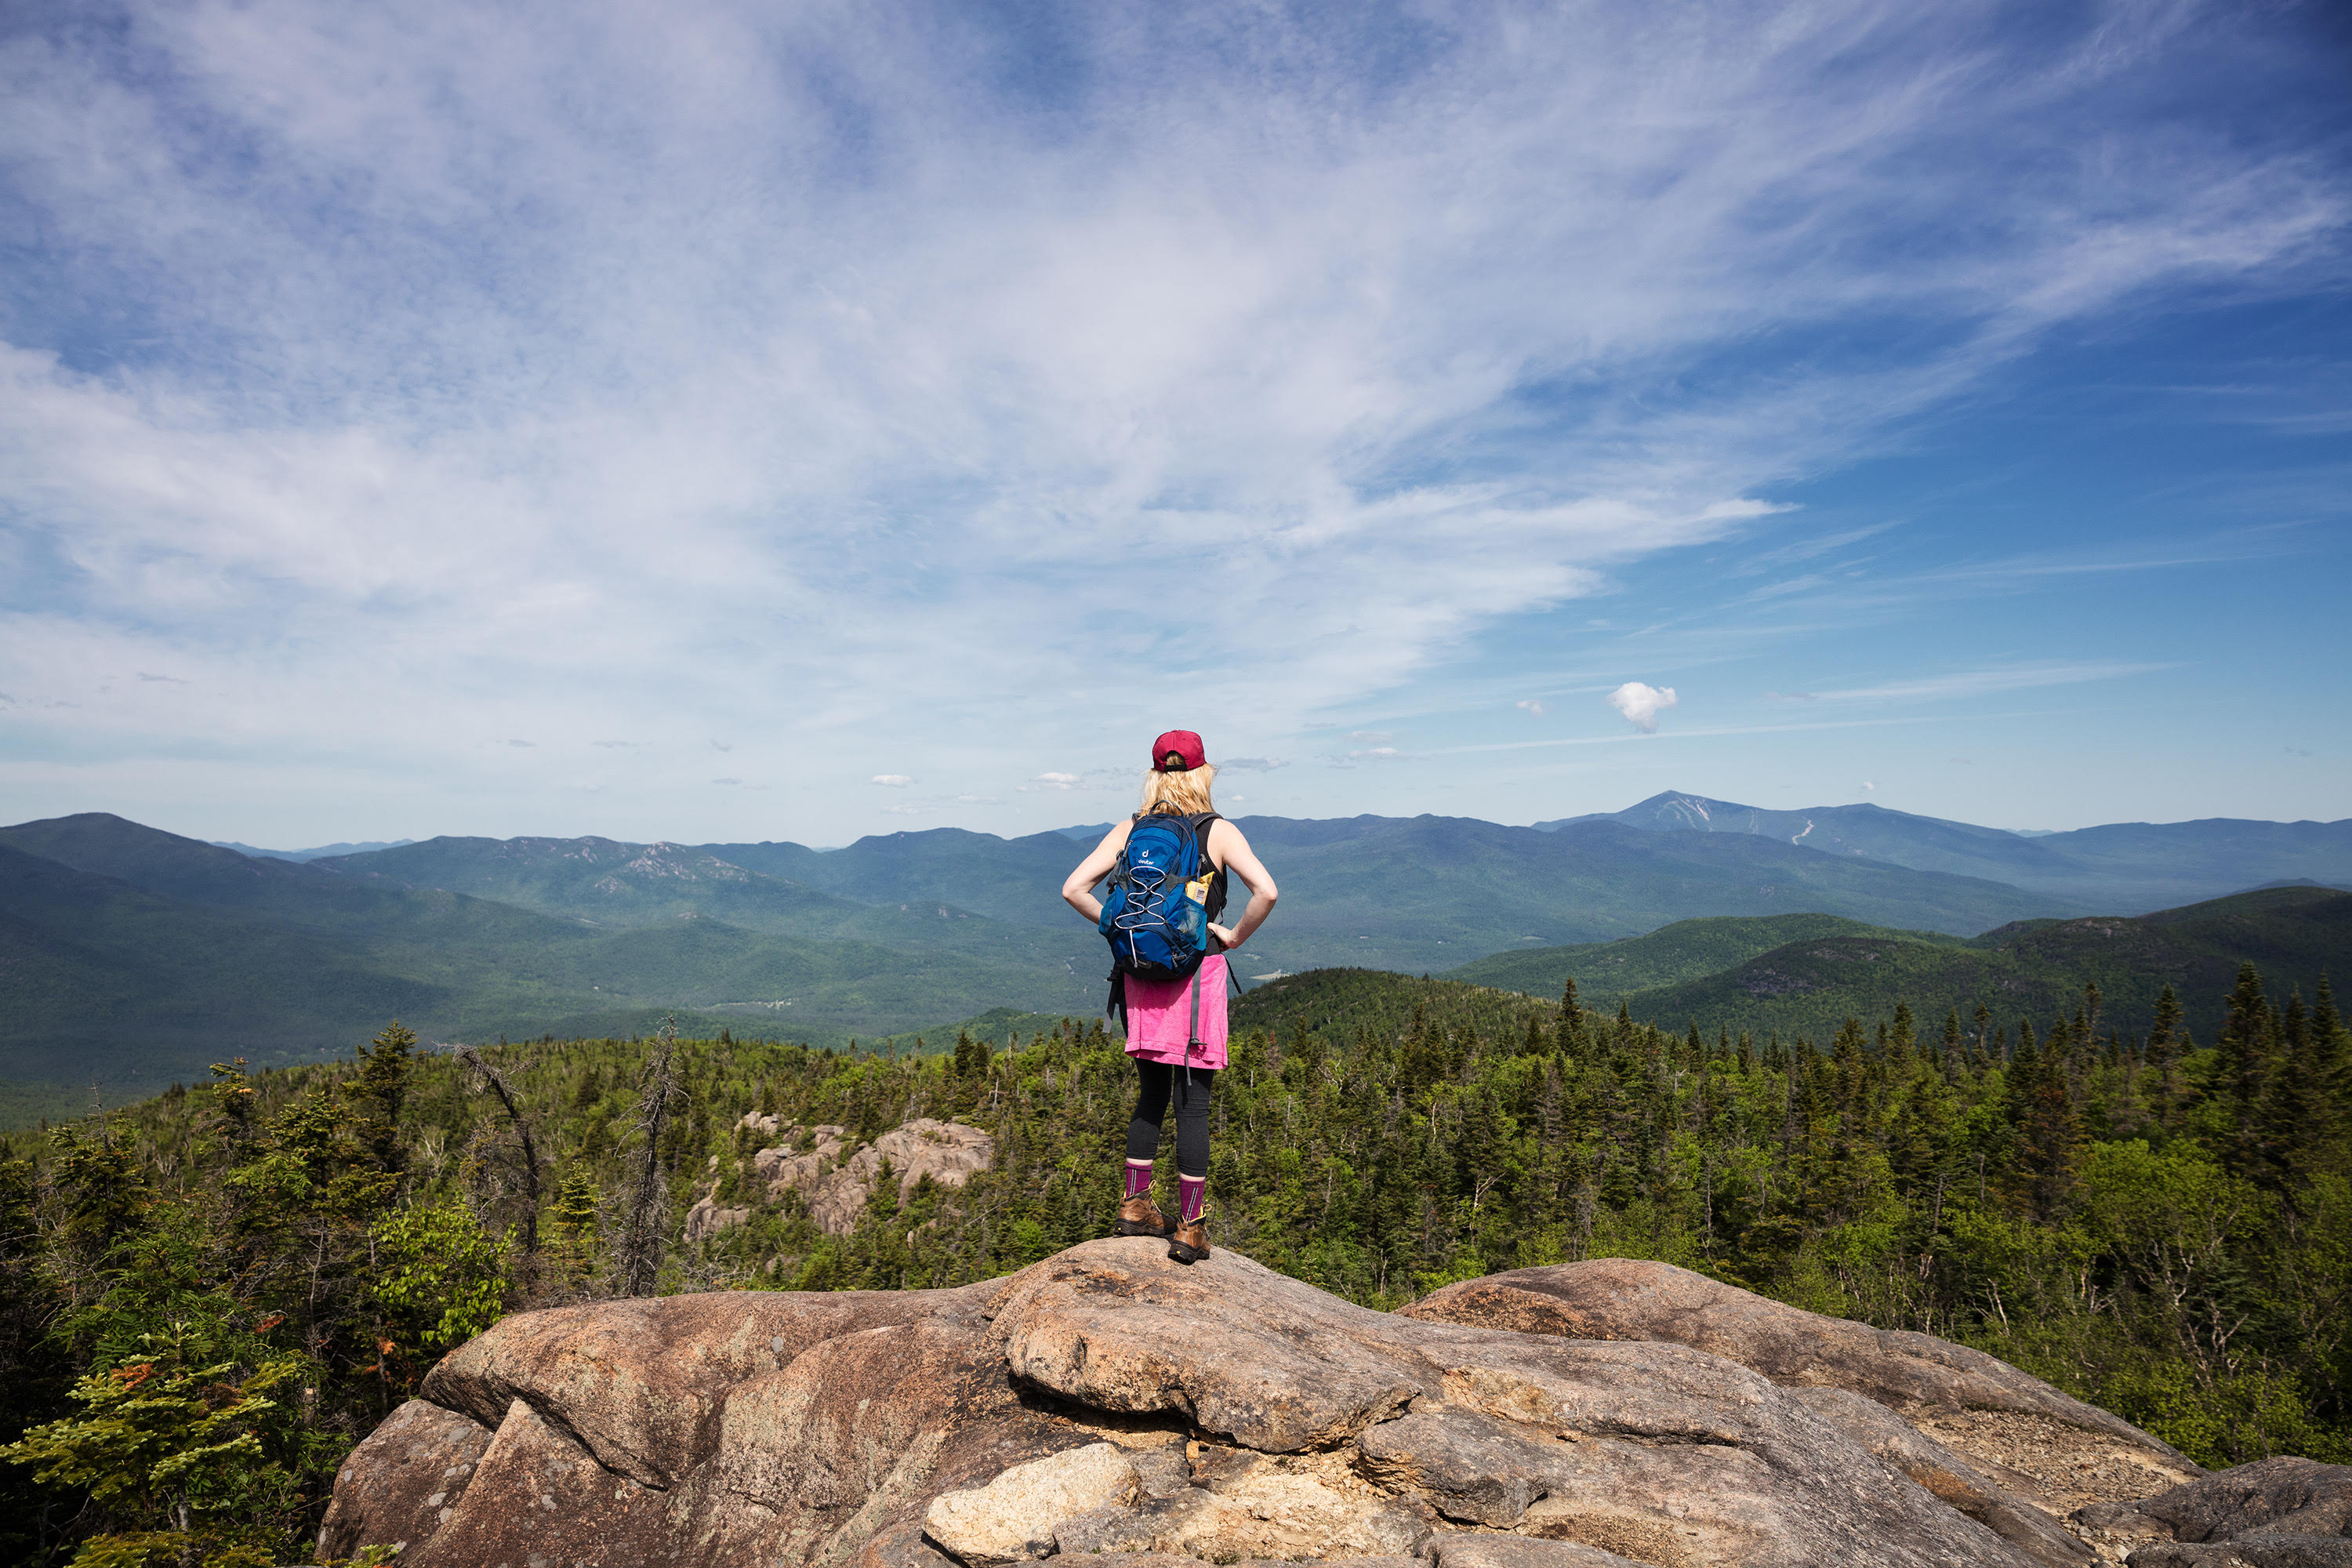 A woman in hiking gear facing away from camera looks out over mountains, forest and sky.